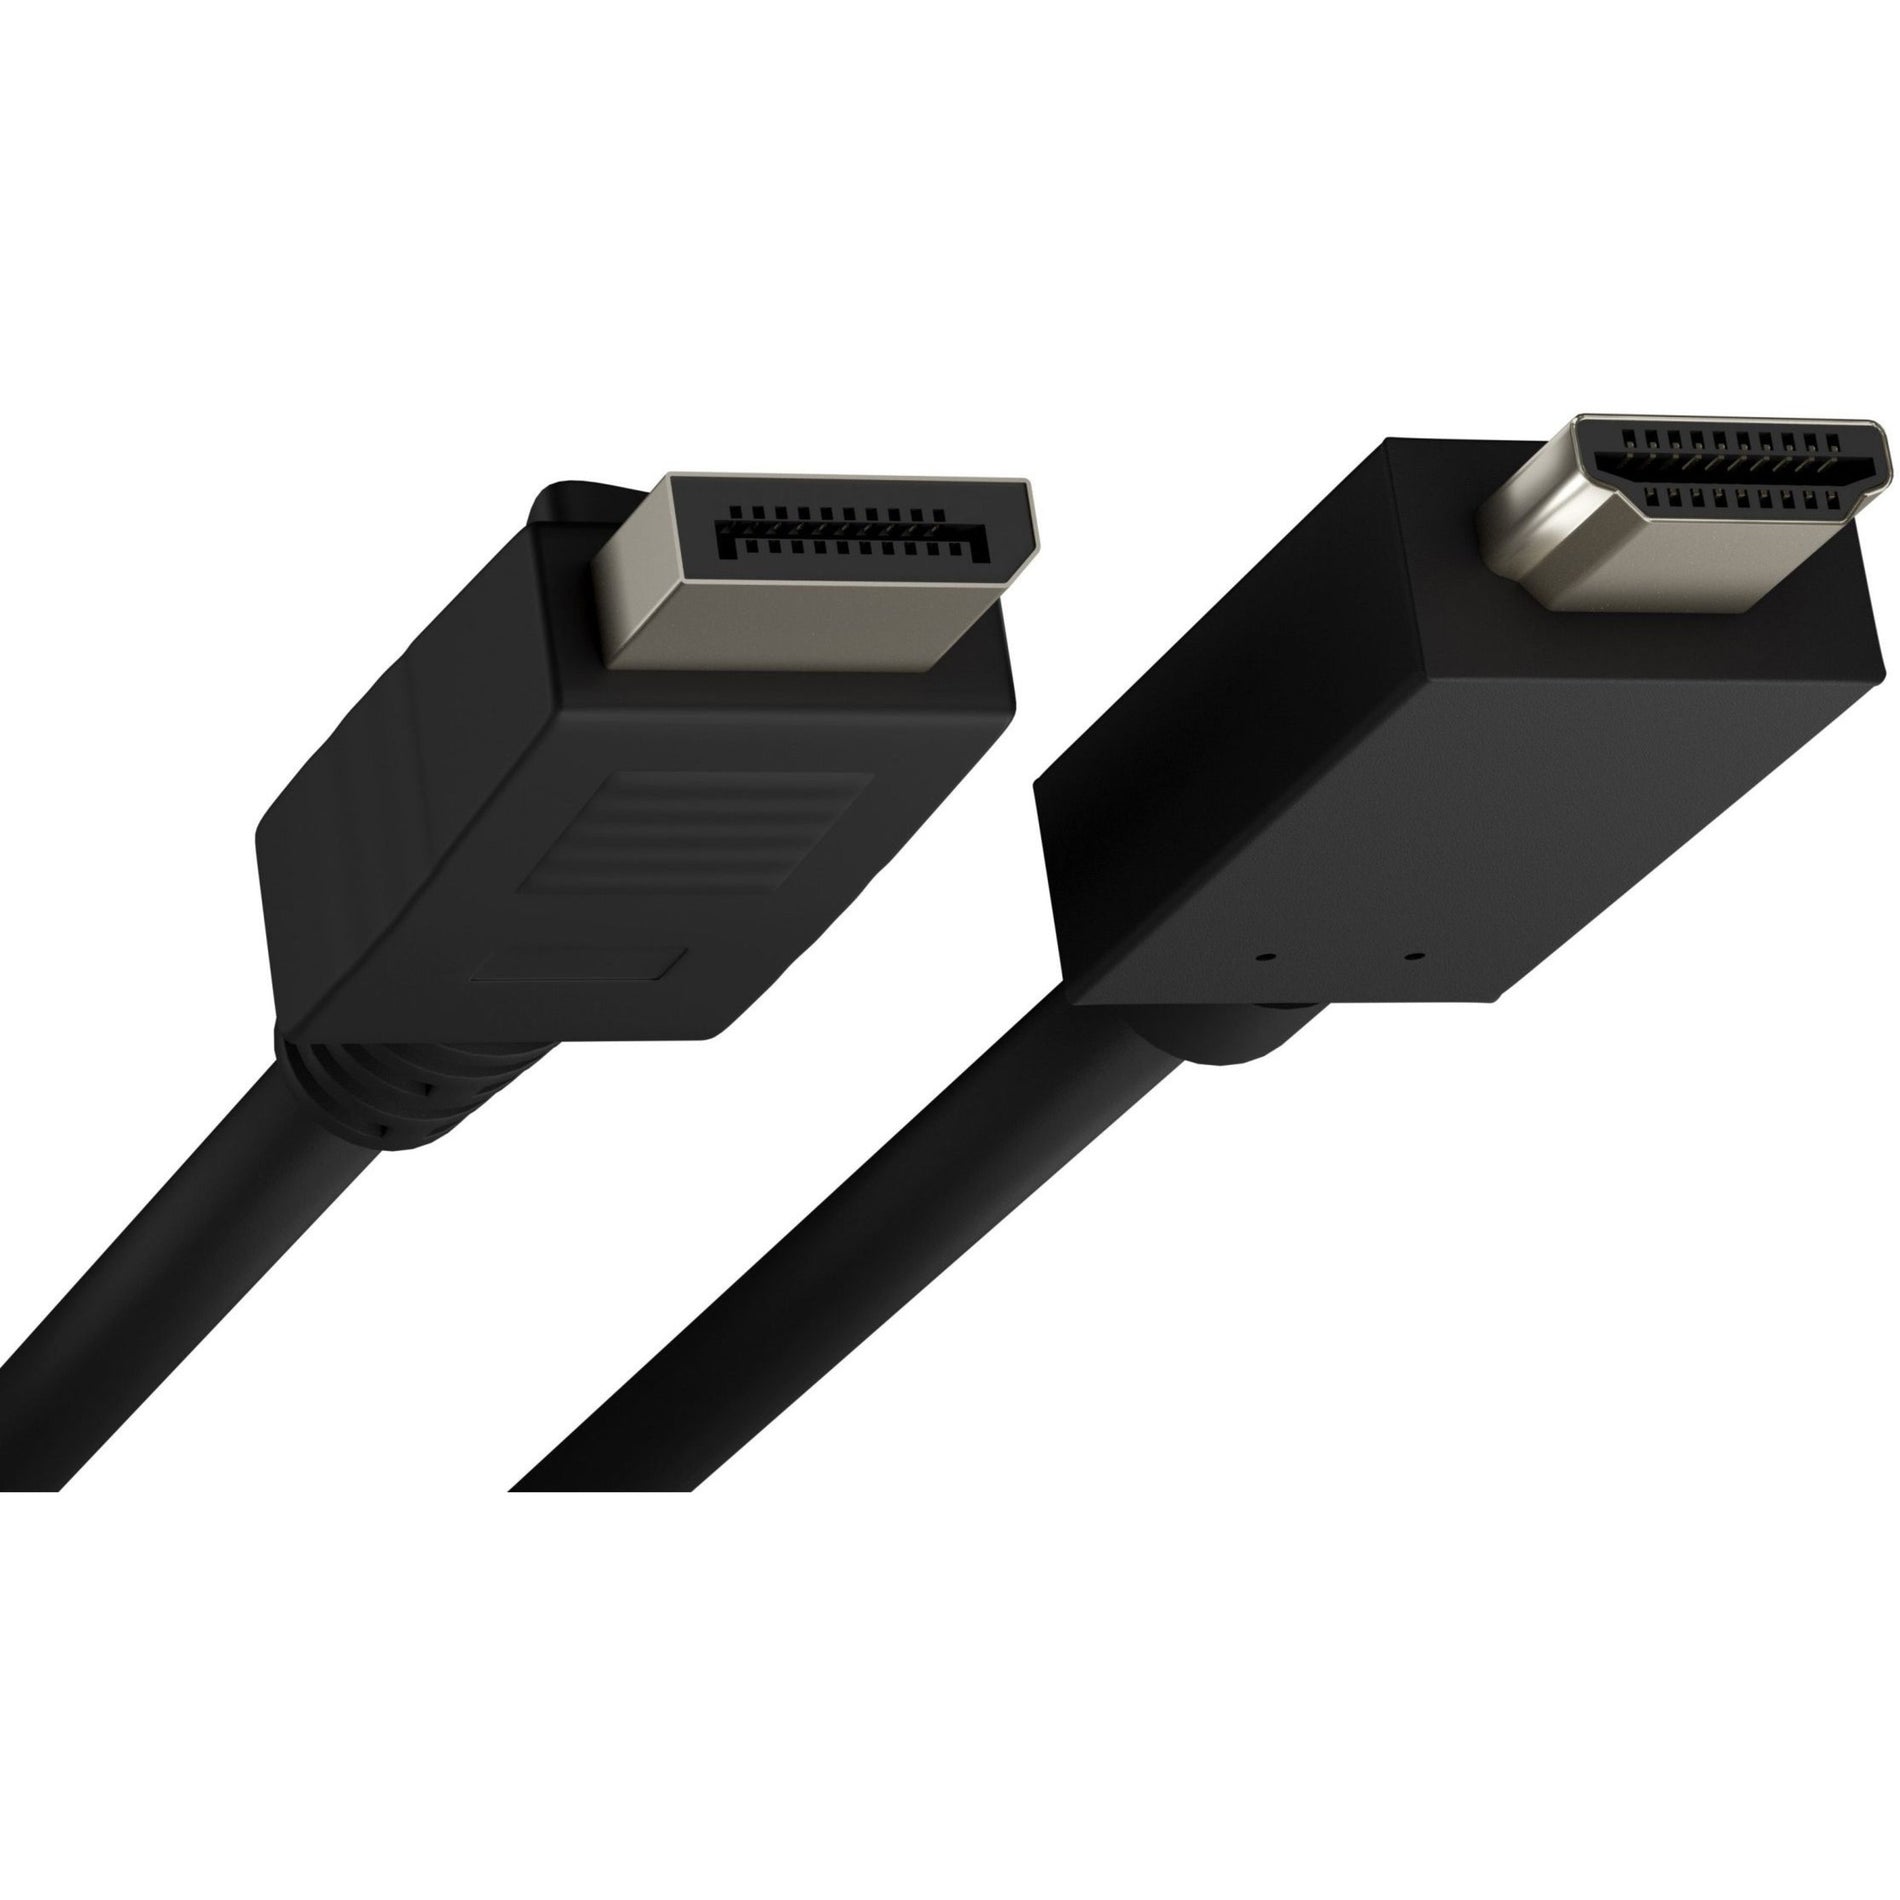 Unirise HDMIDP-10F-MM 10ft Displayport Male to HDMI Male Cable, High Quality Audio/Video Connection